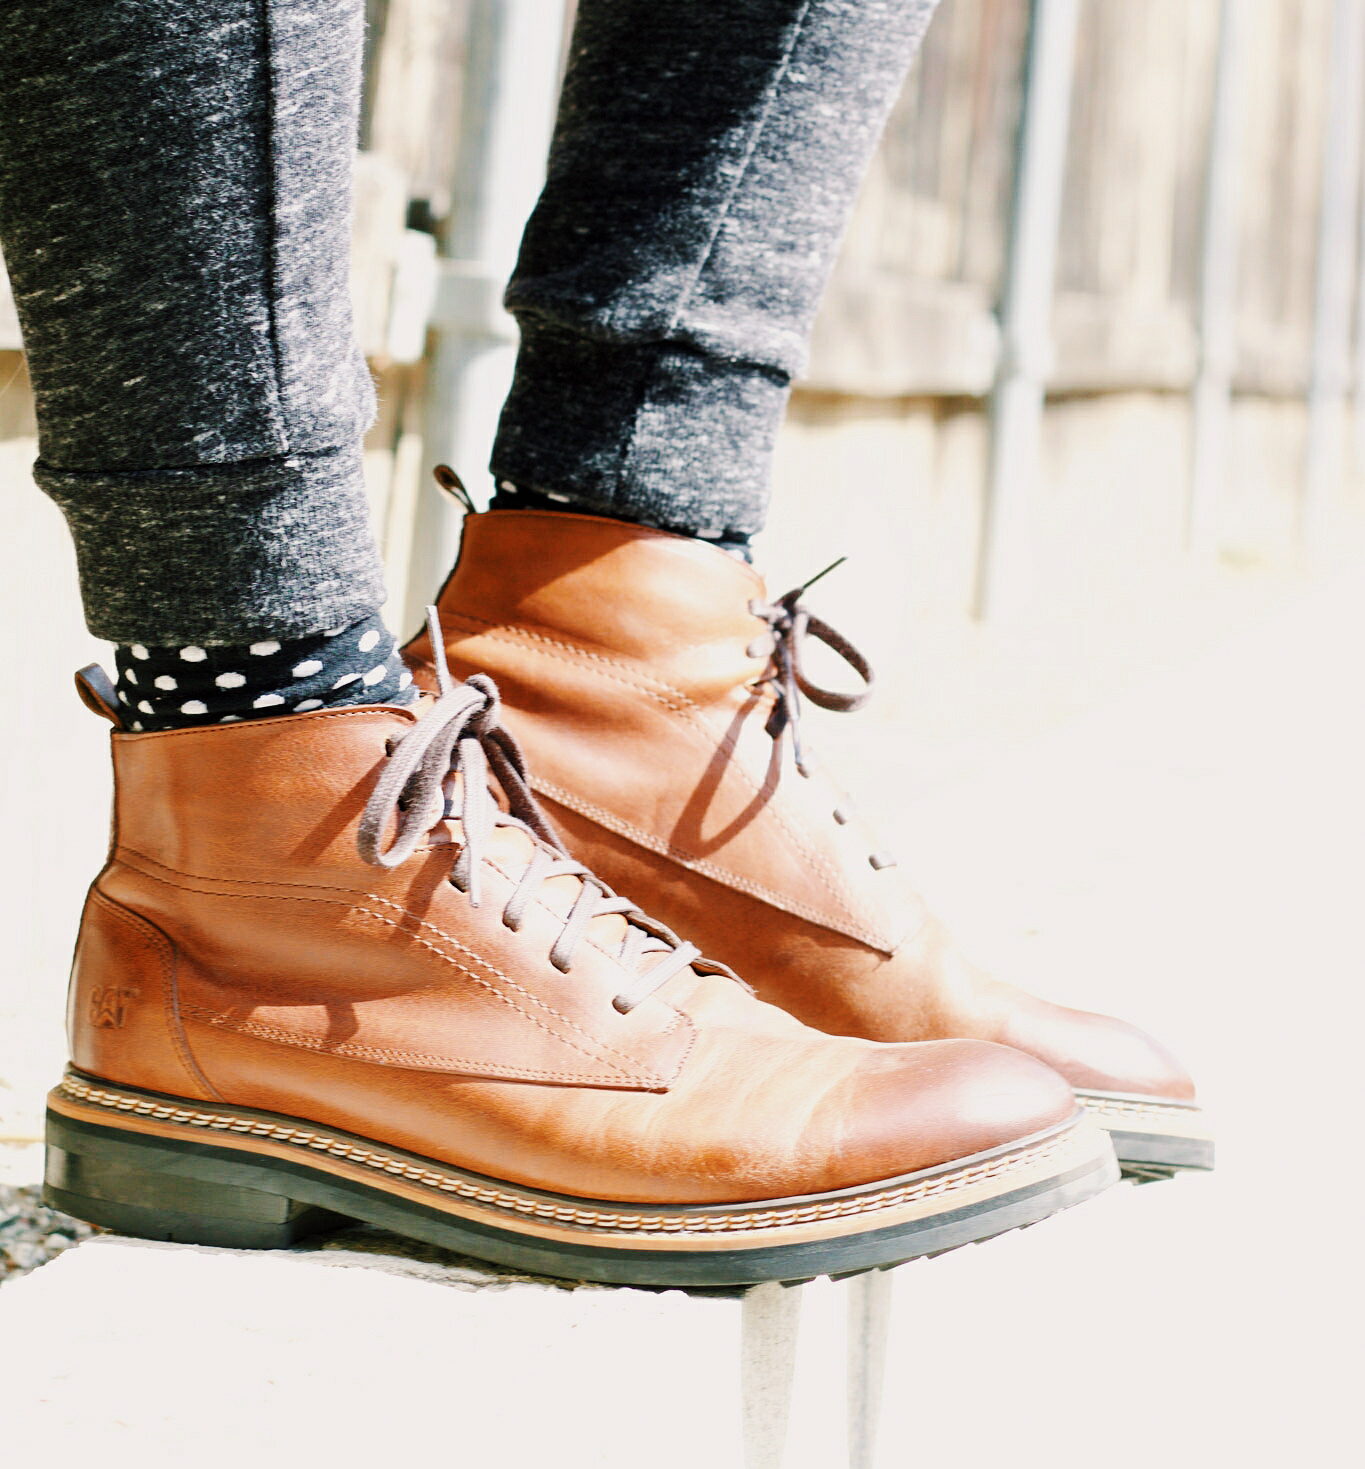 Boot Weather Has Arrived | Brick & Vine